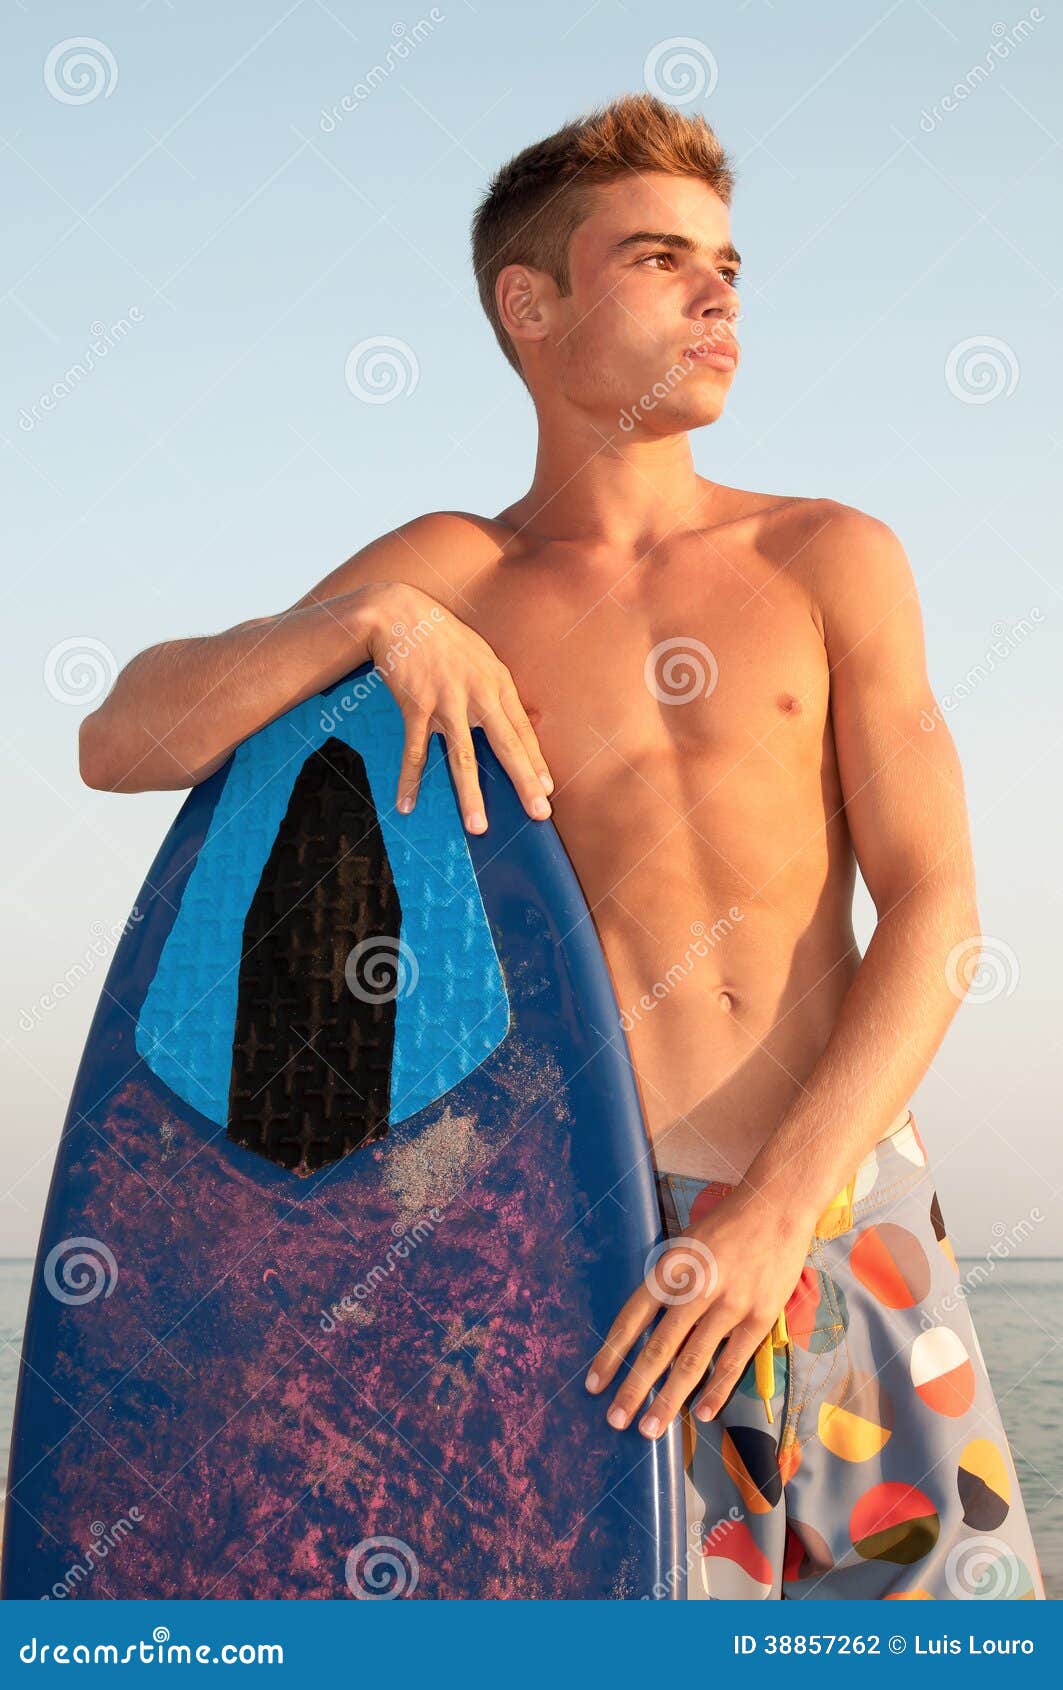 Summer sport stock photo. Image of surf, teen, vacation - 38857262